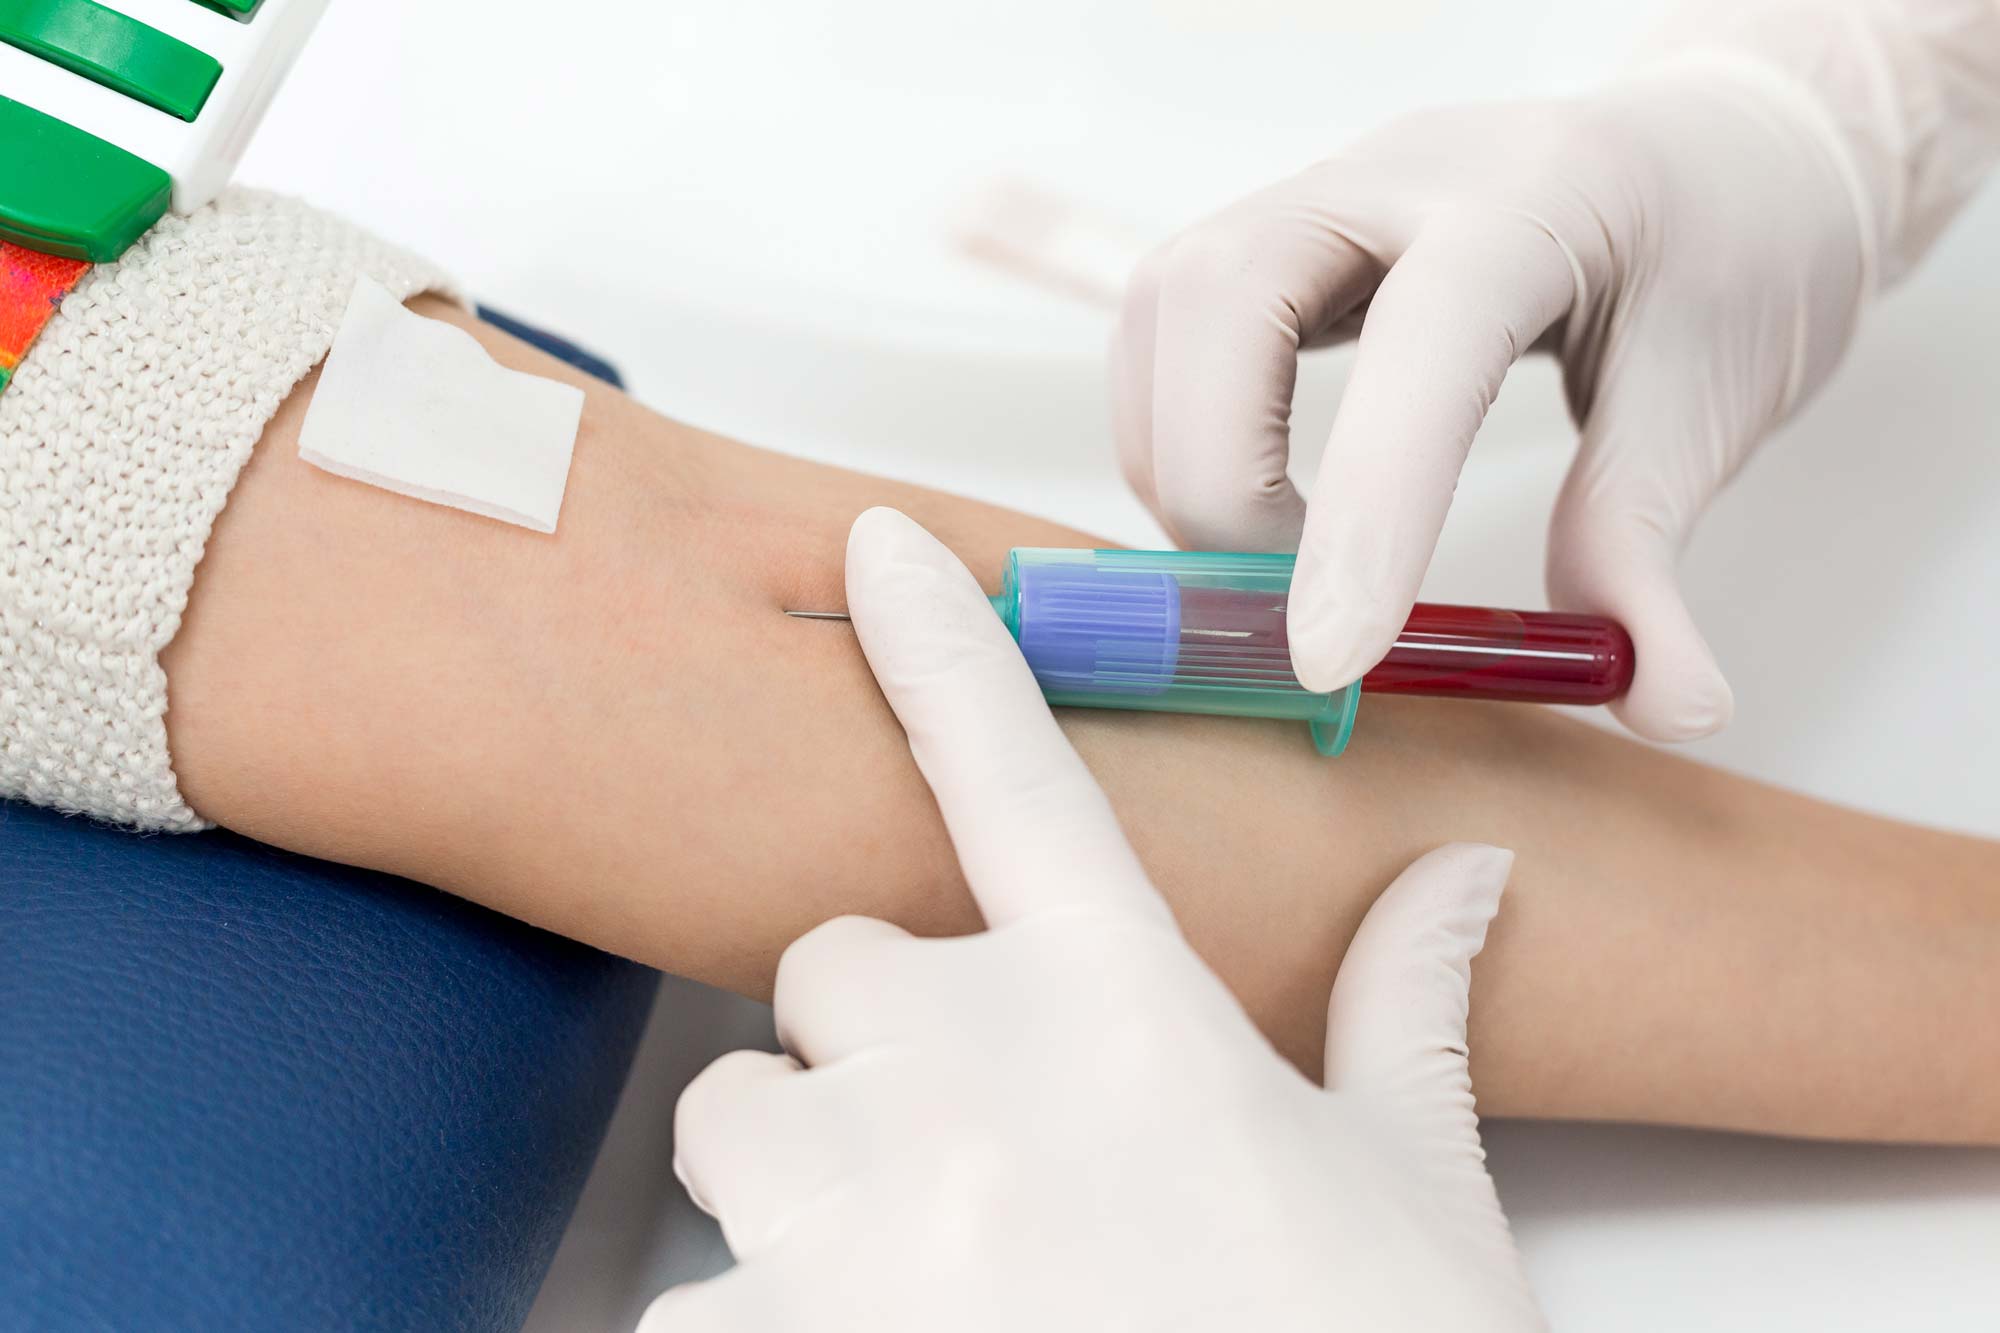 Does Blood Test Invalidate Fasting?